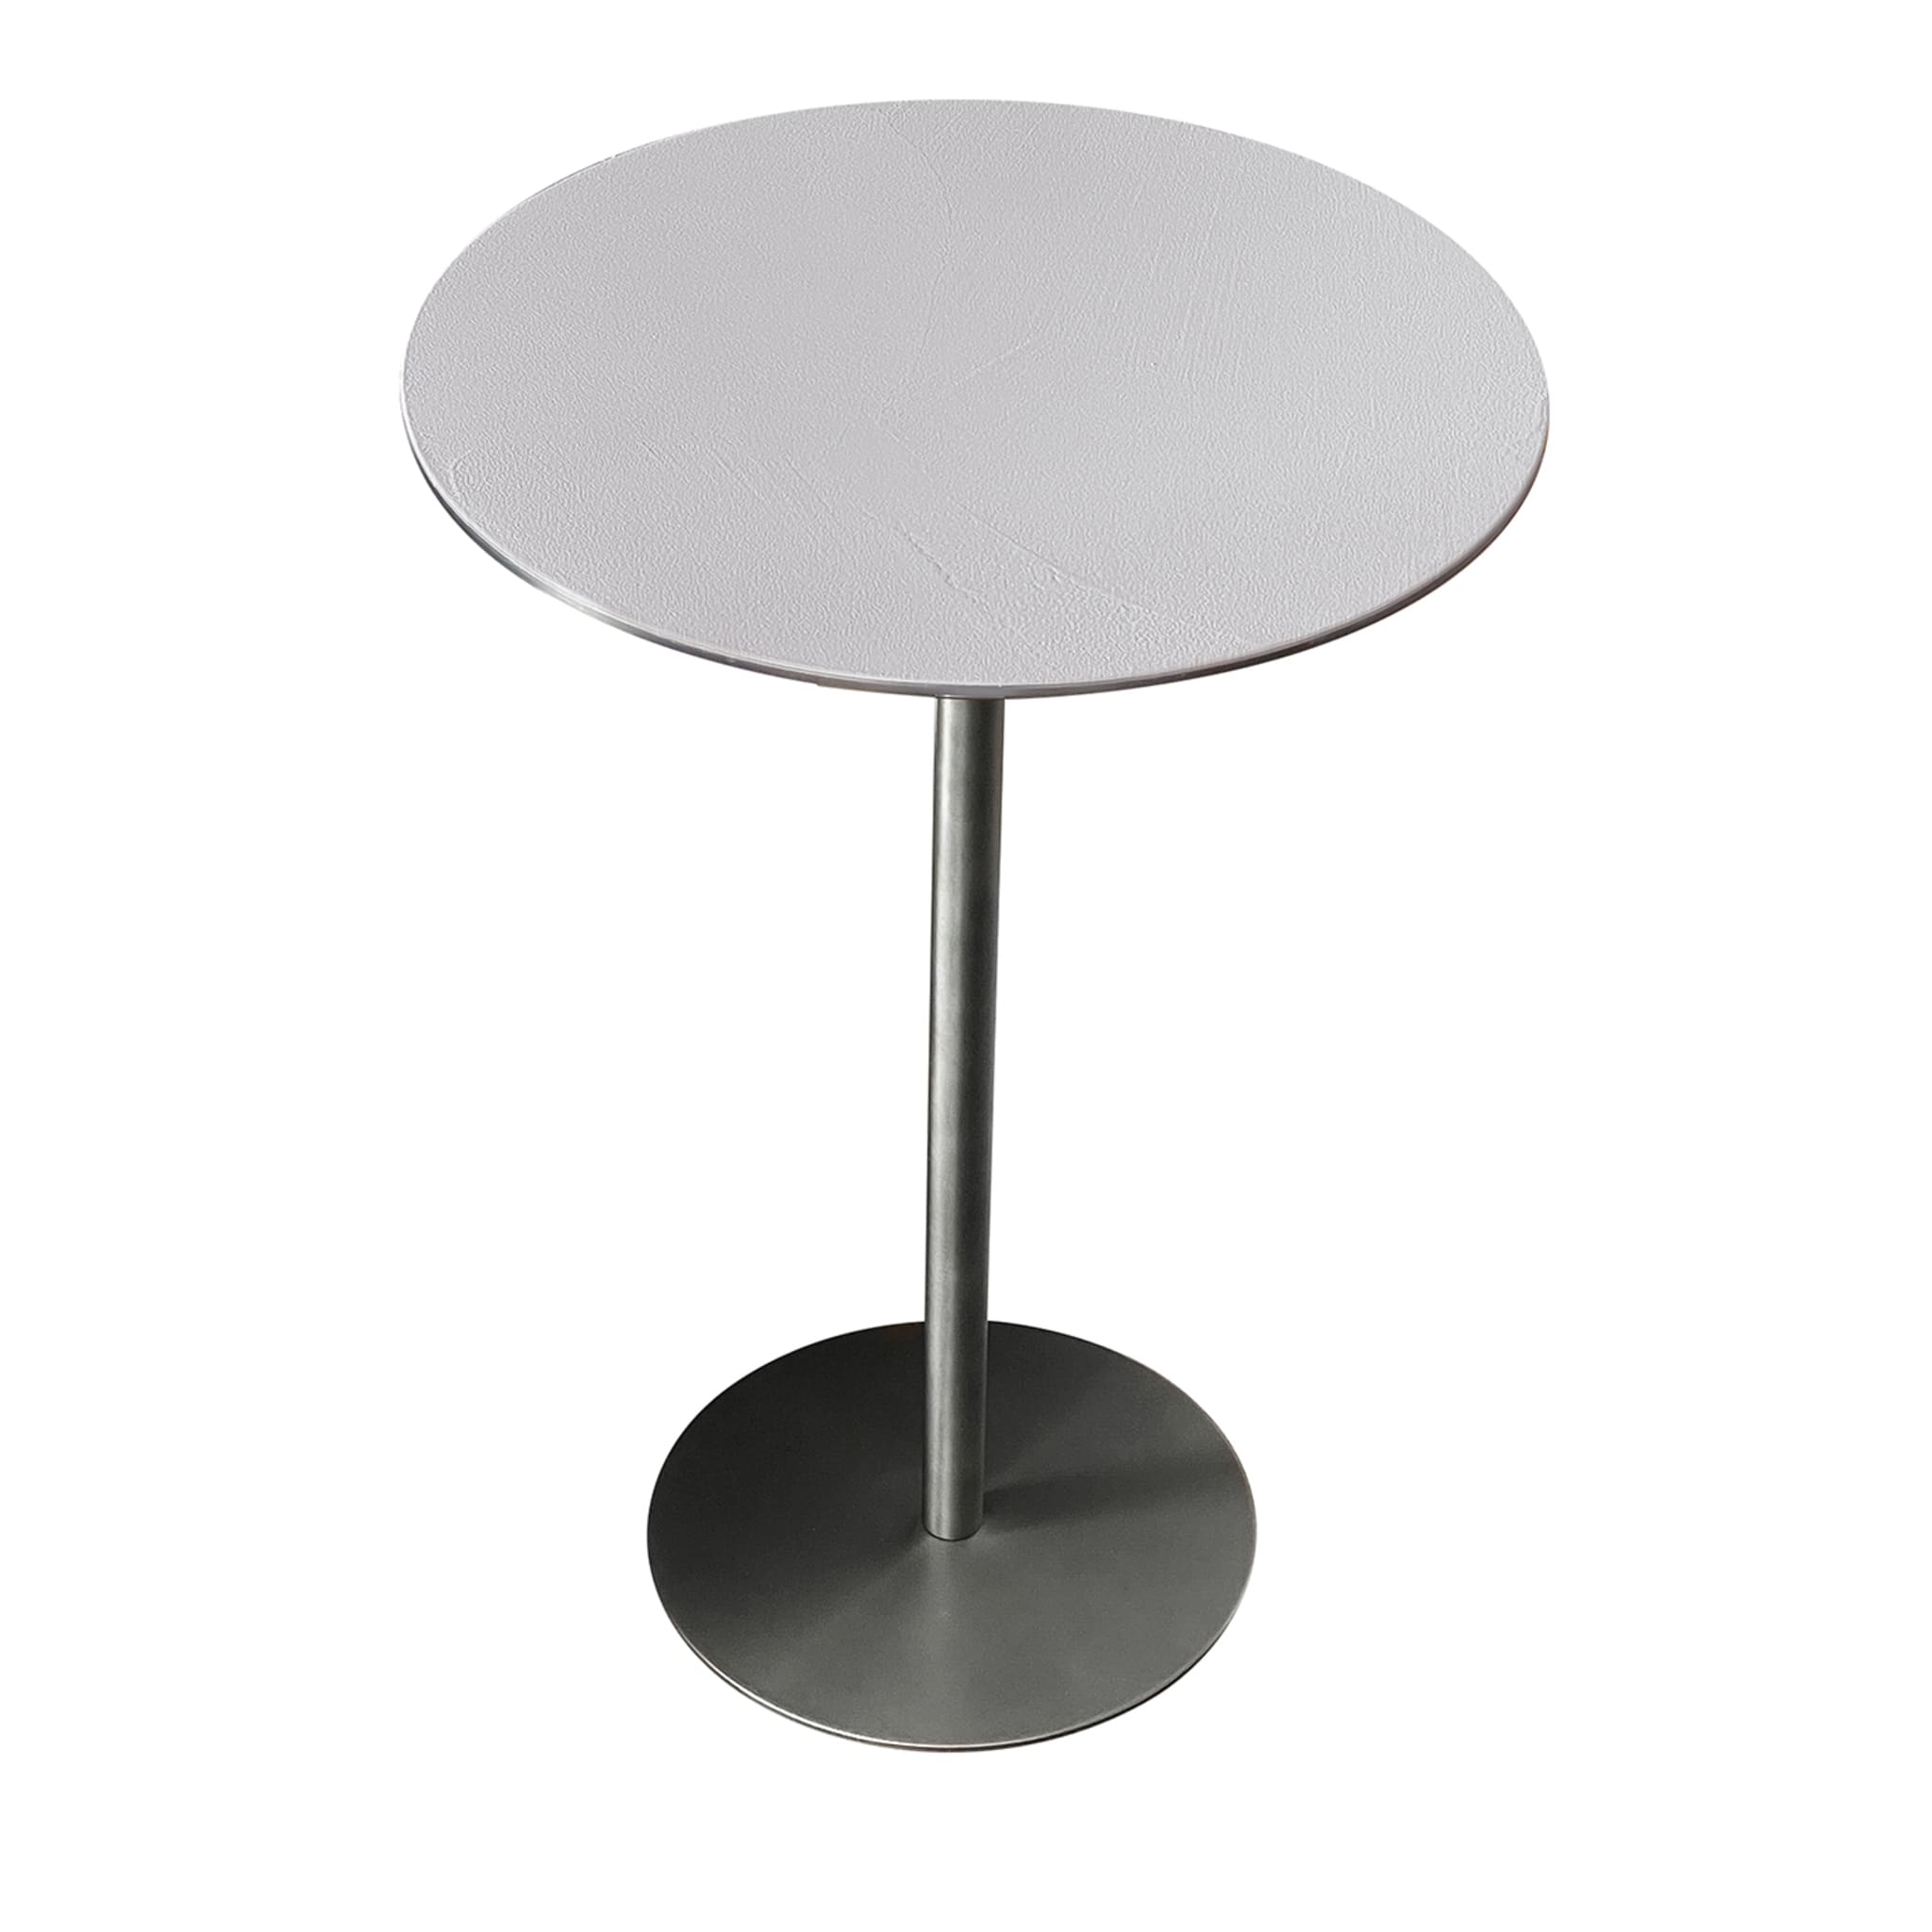 Ester Polvere Stainless Steel Table - Main view